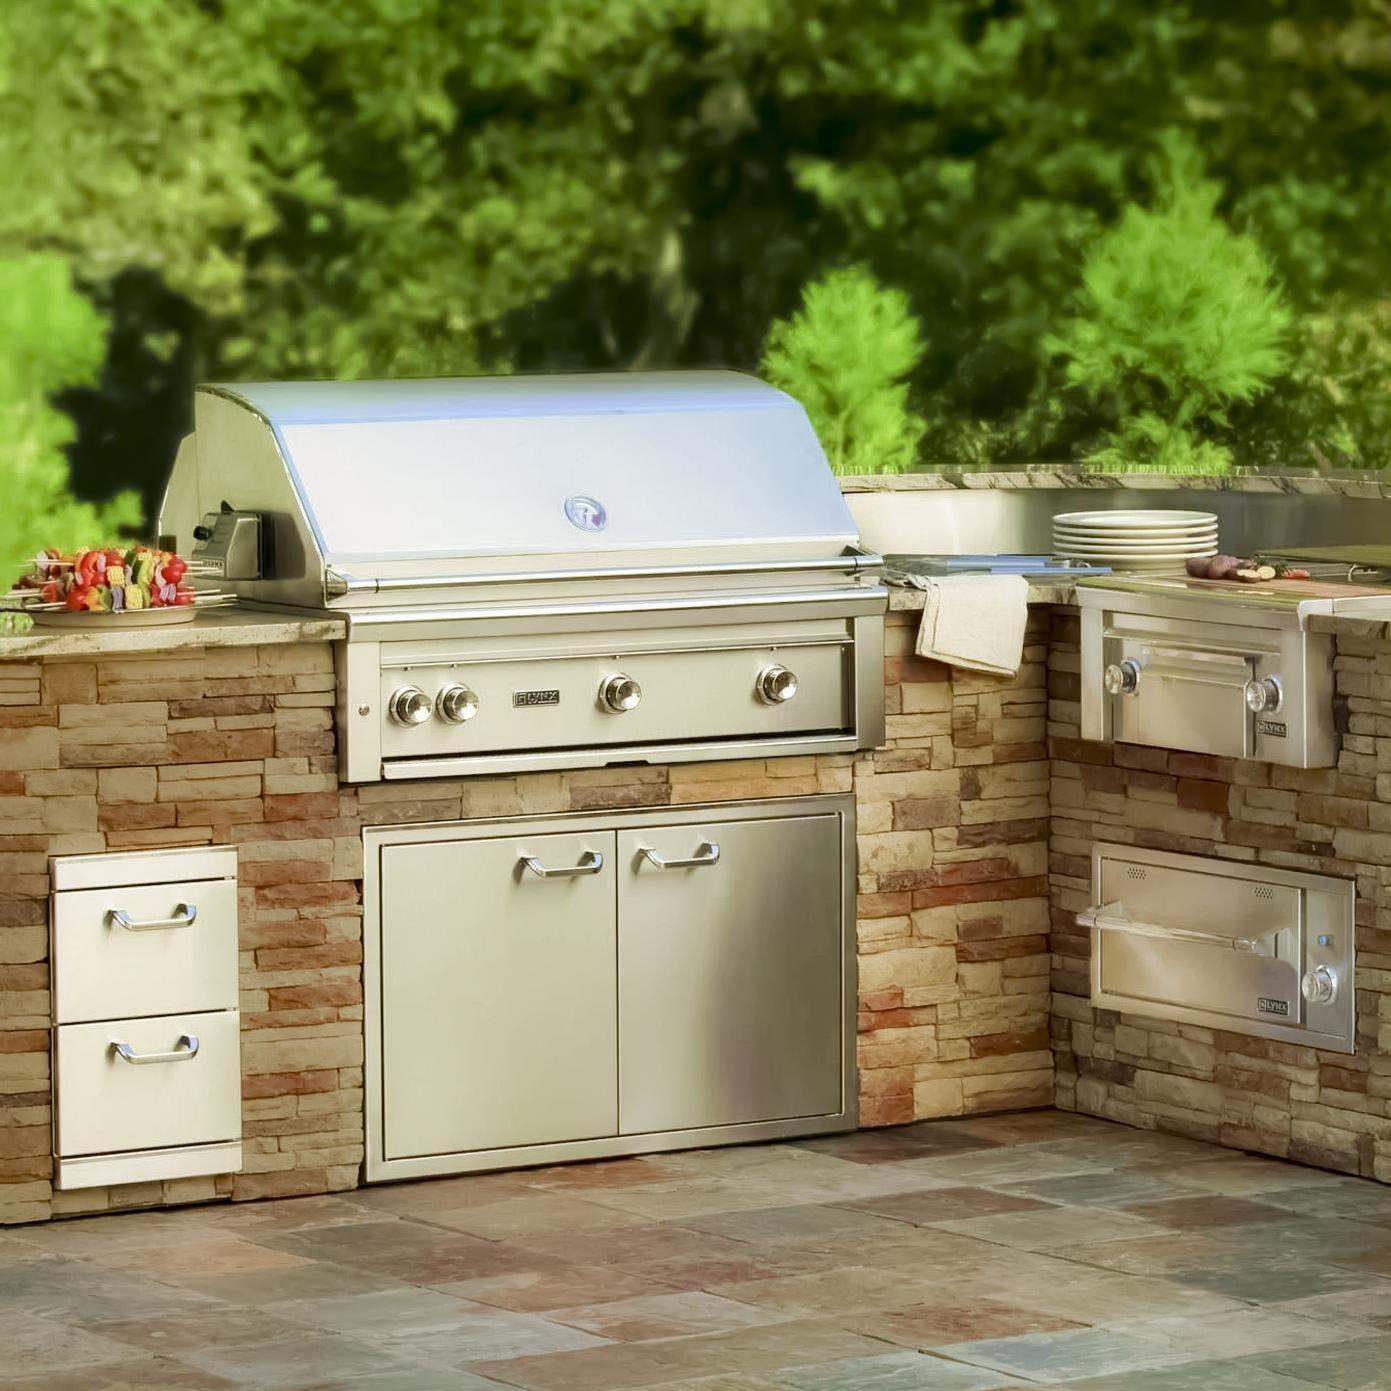 Lynx 36-inch Built-in Natural Gas Grill With Rotisserie L36r-1-ng